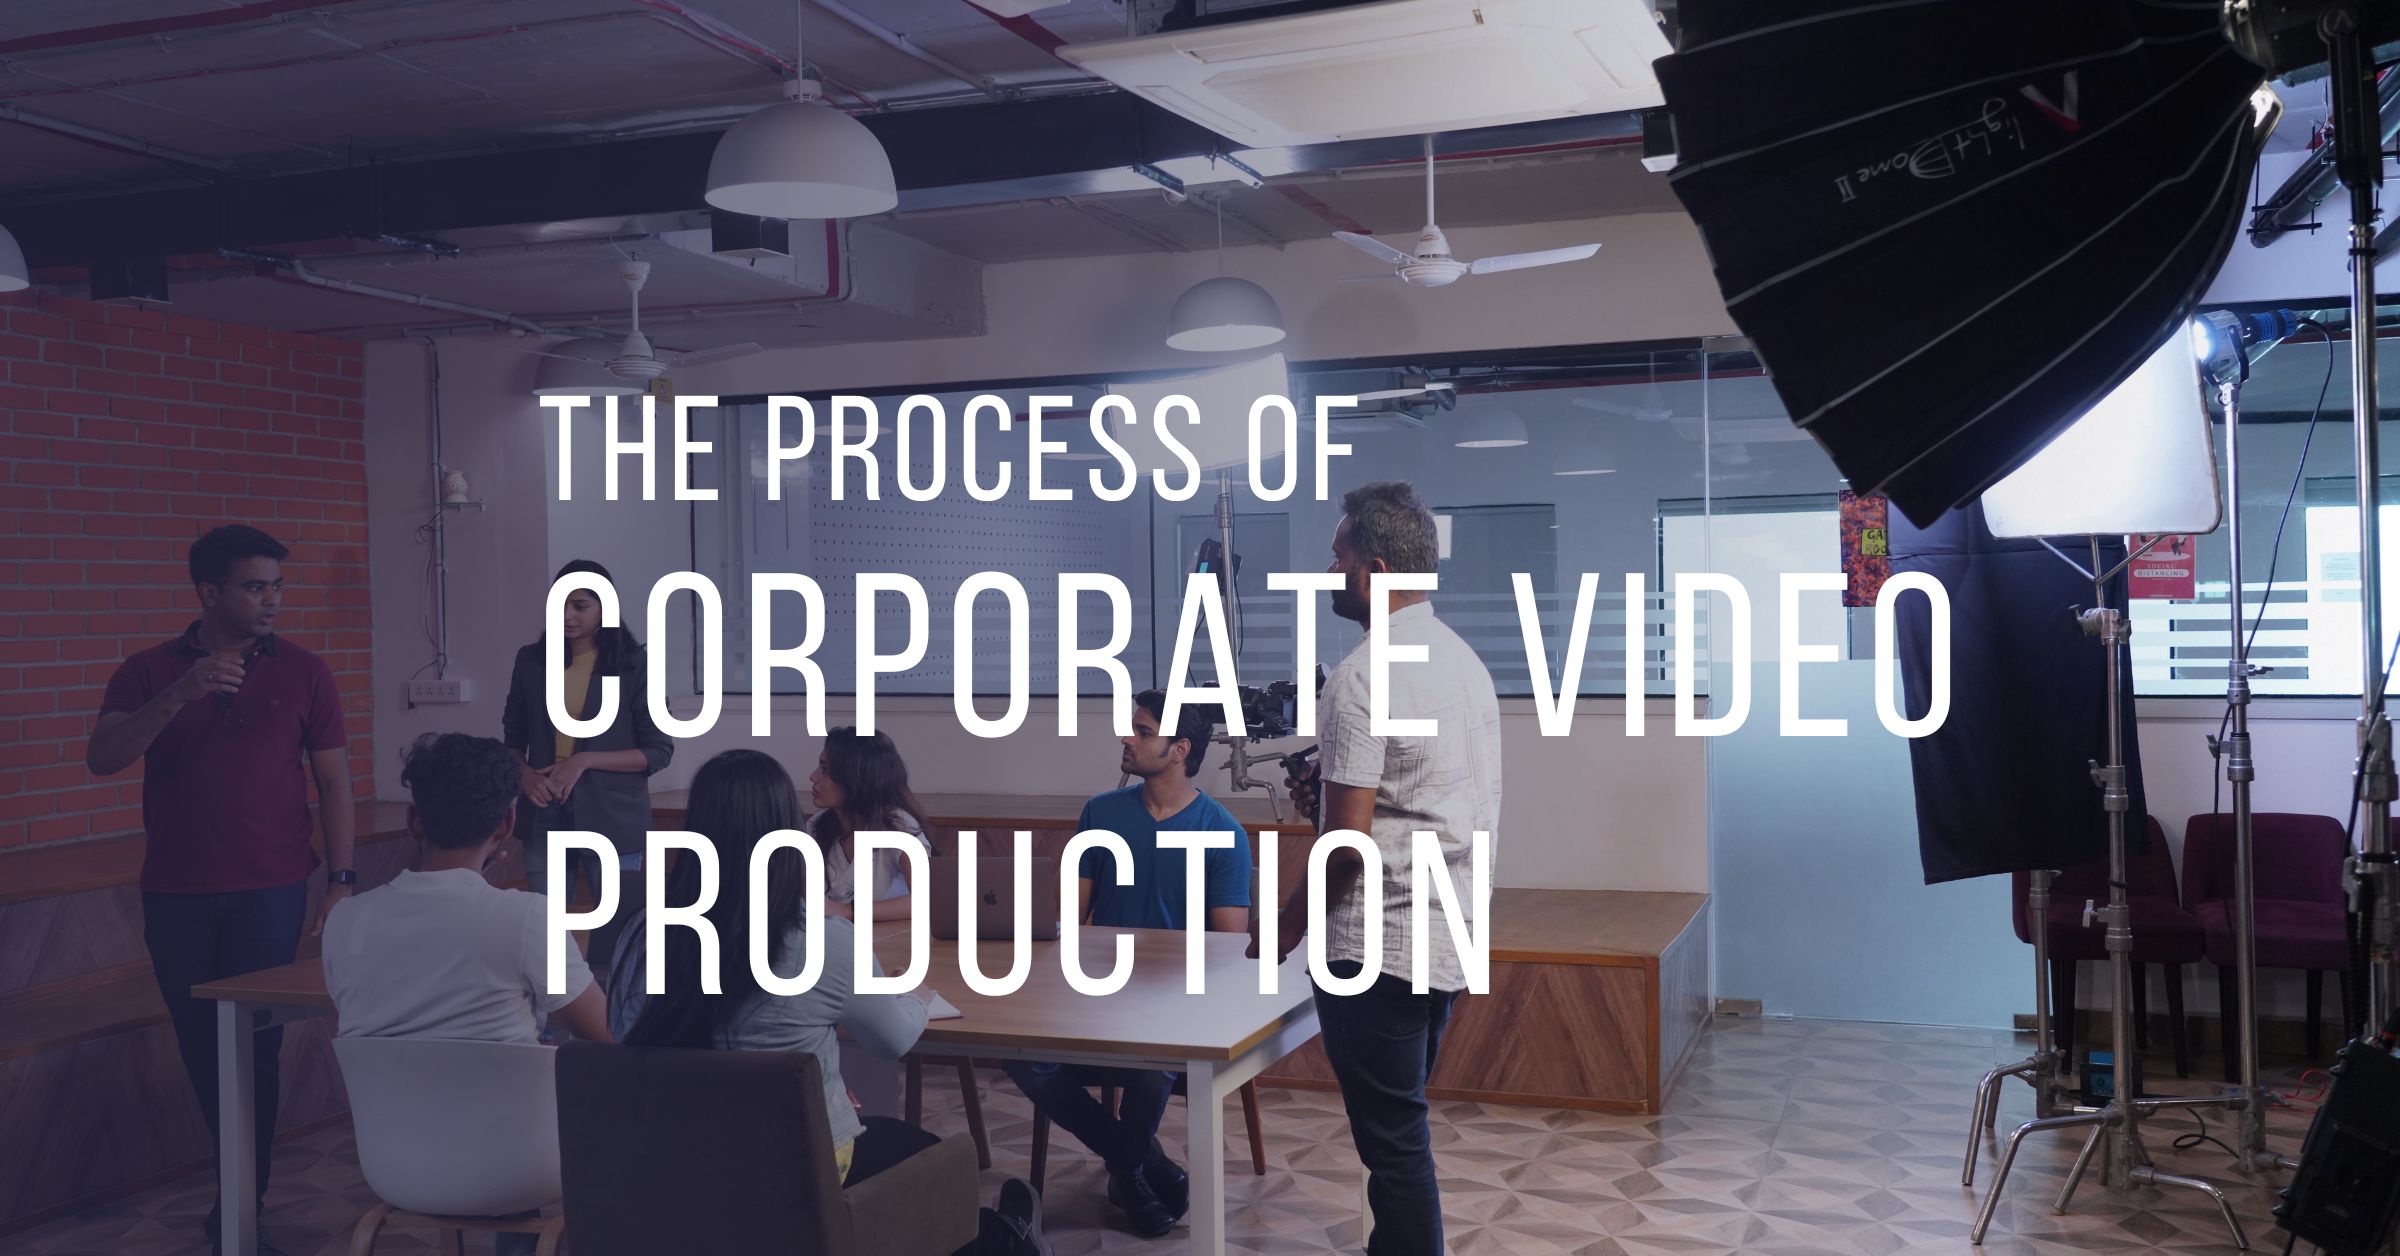 Corporate Commercial Video